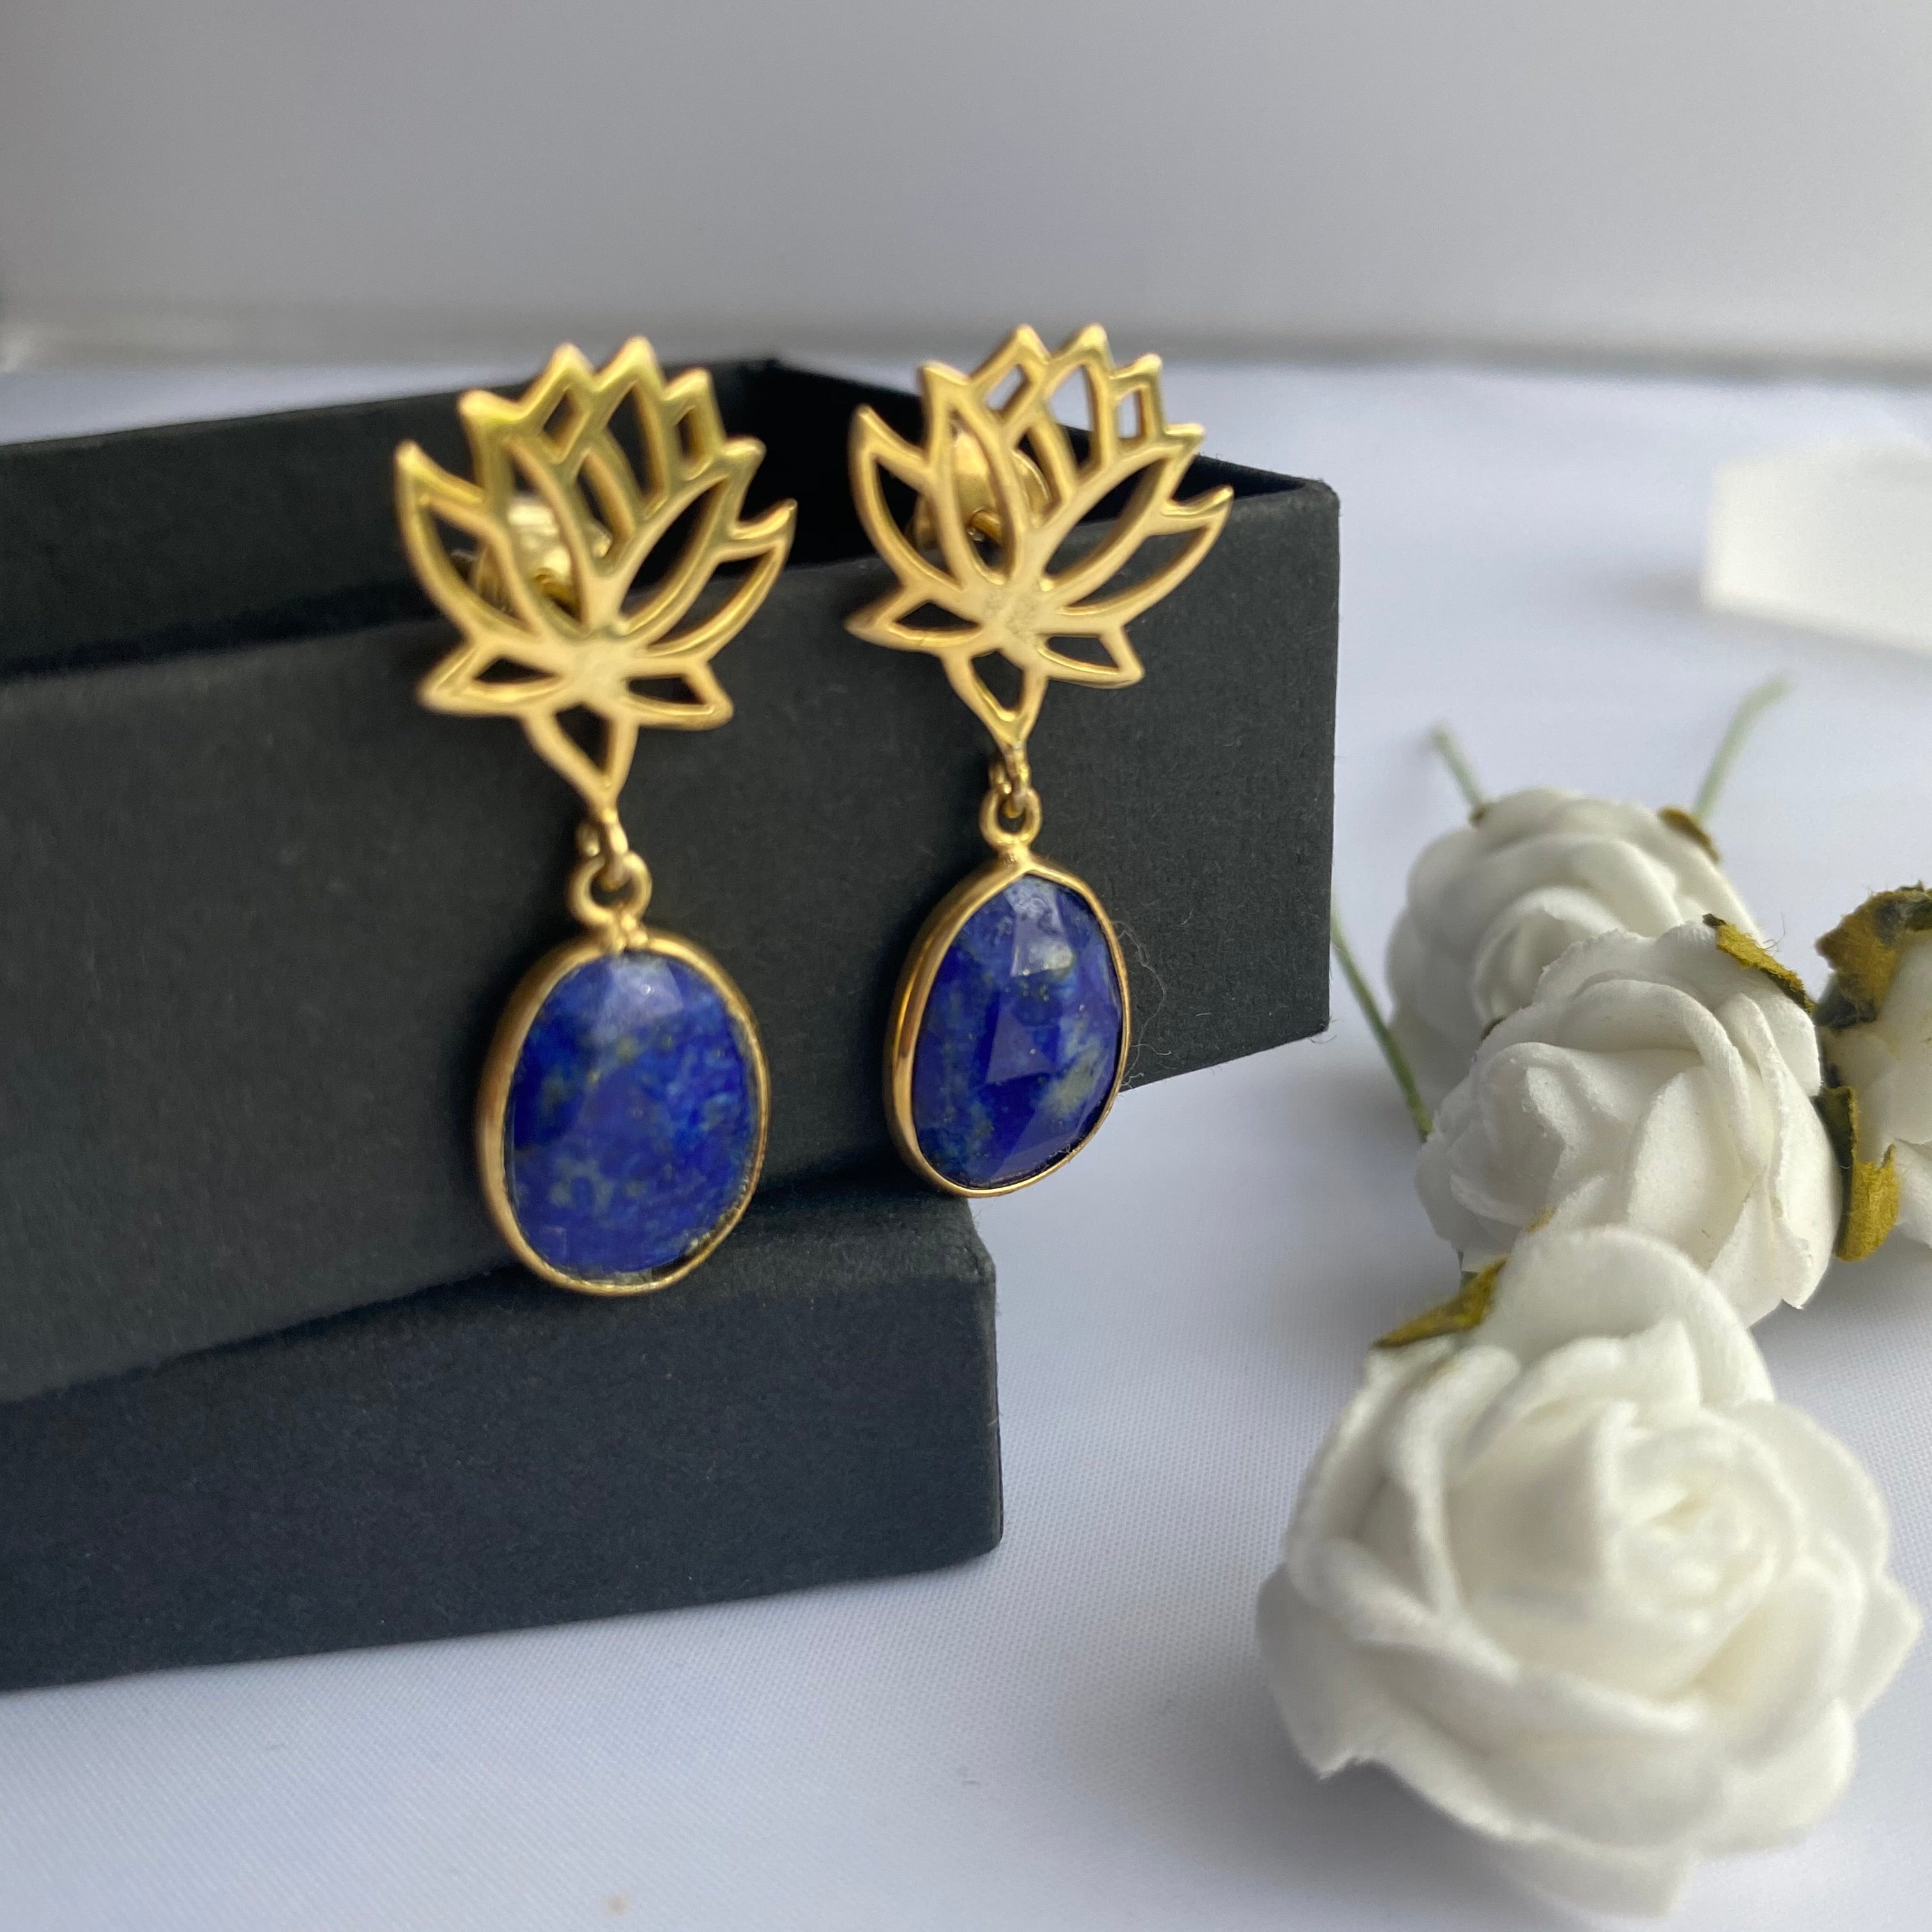 Lotus Earrings in Gold Plated Sterling Silver with a Lapis Lazuli Gemstone Drop